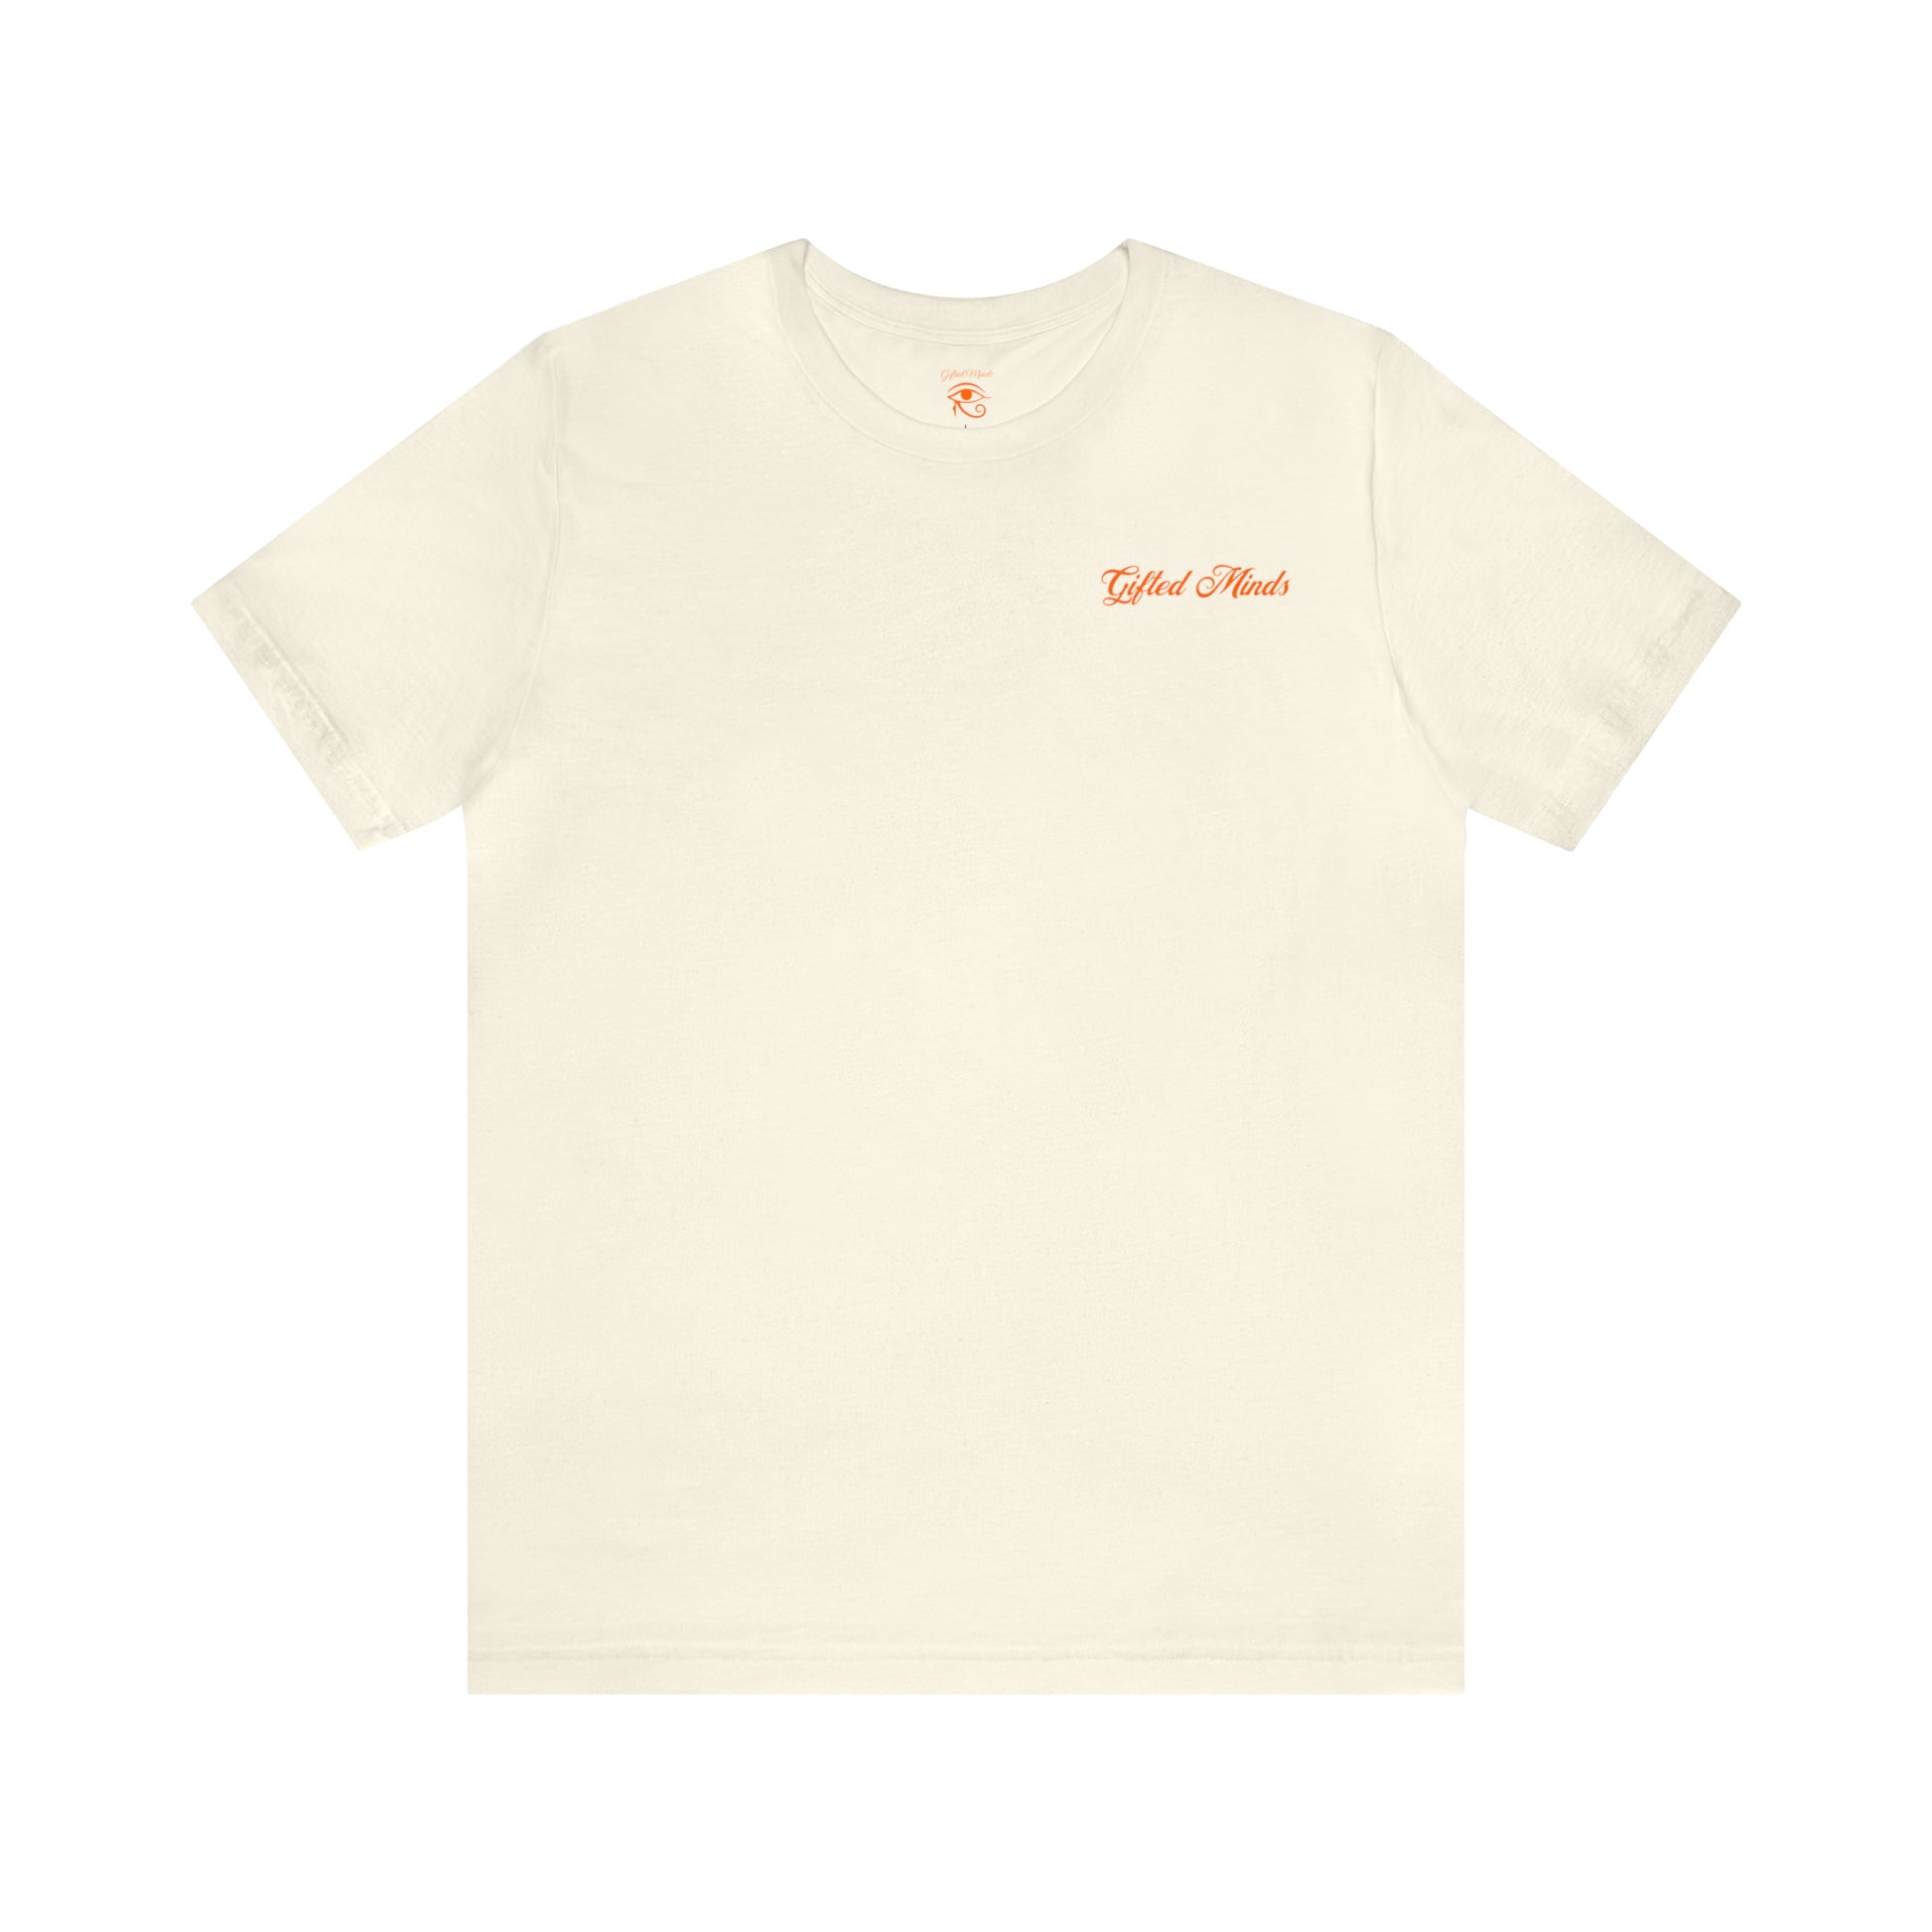 Paradise is Now Short Sleeve Tee - GFTD MNDS